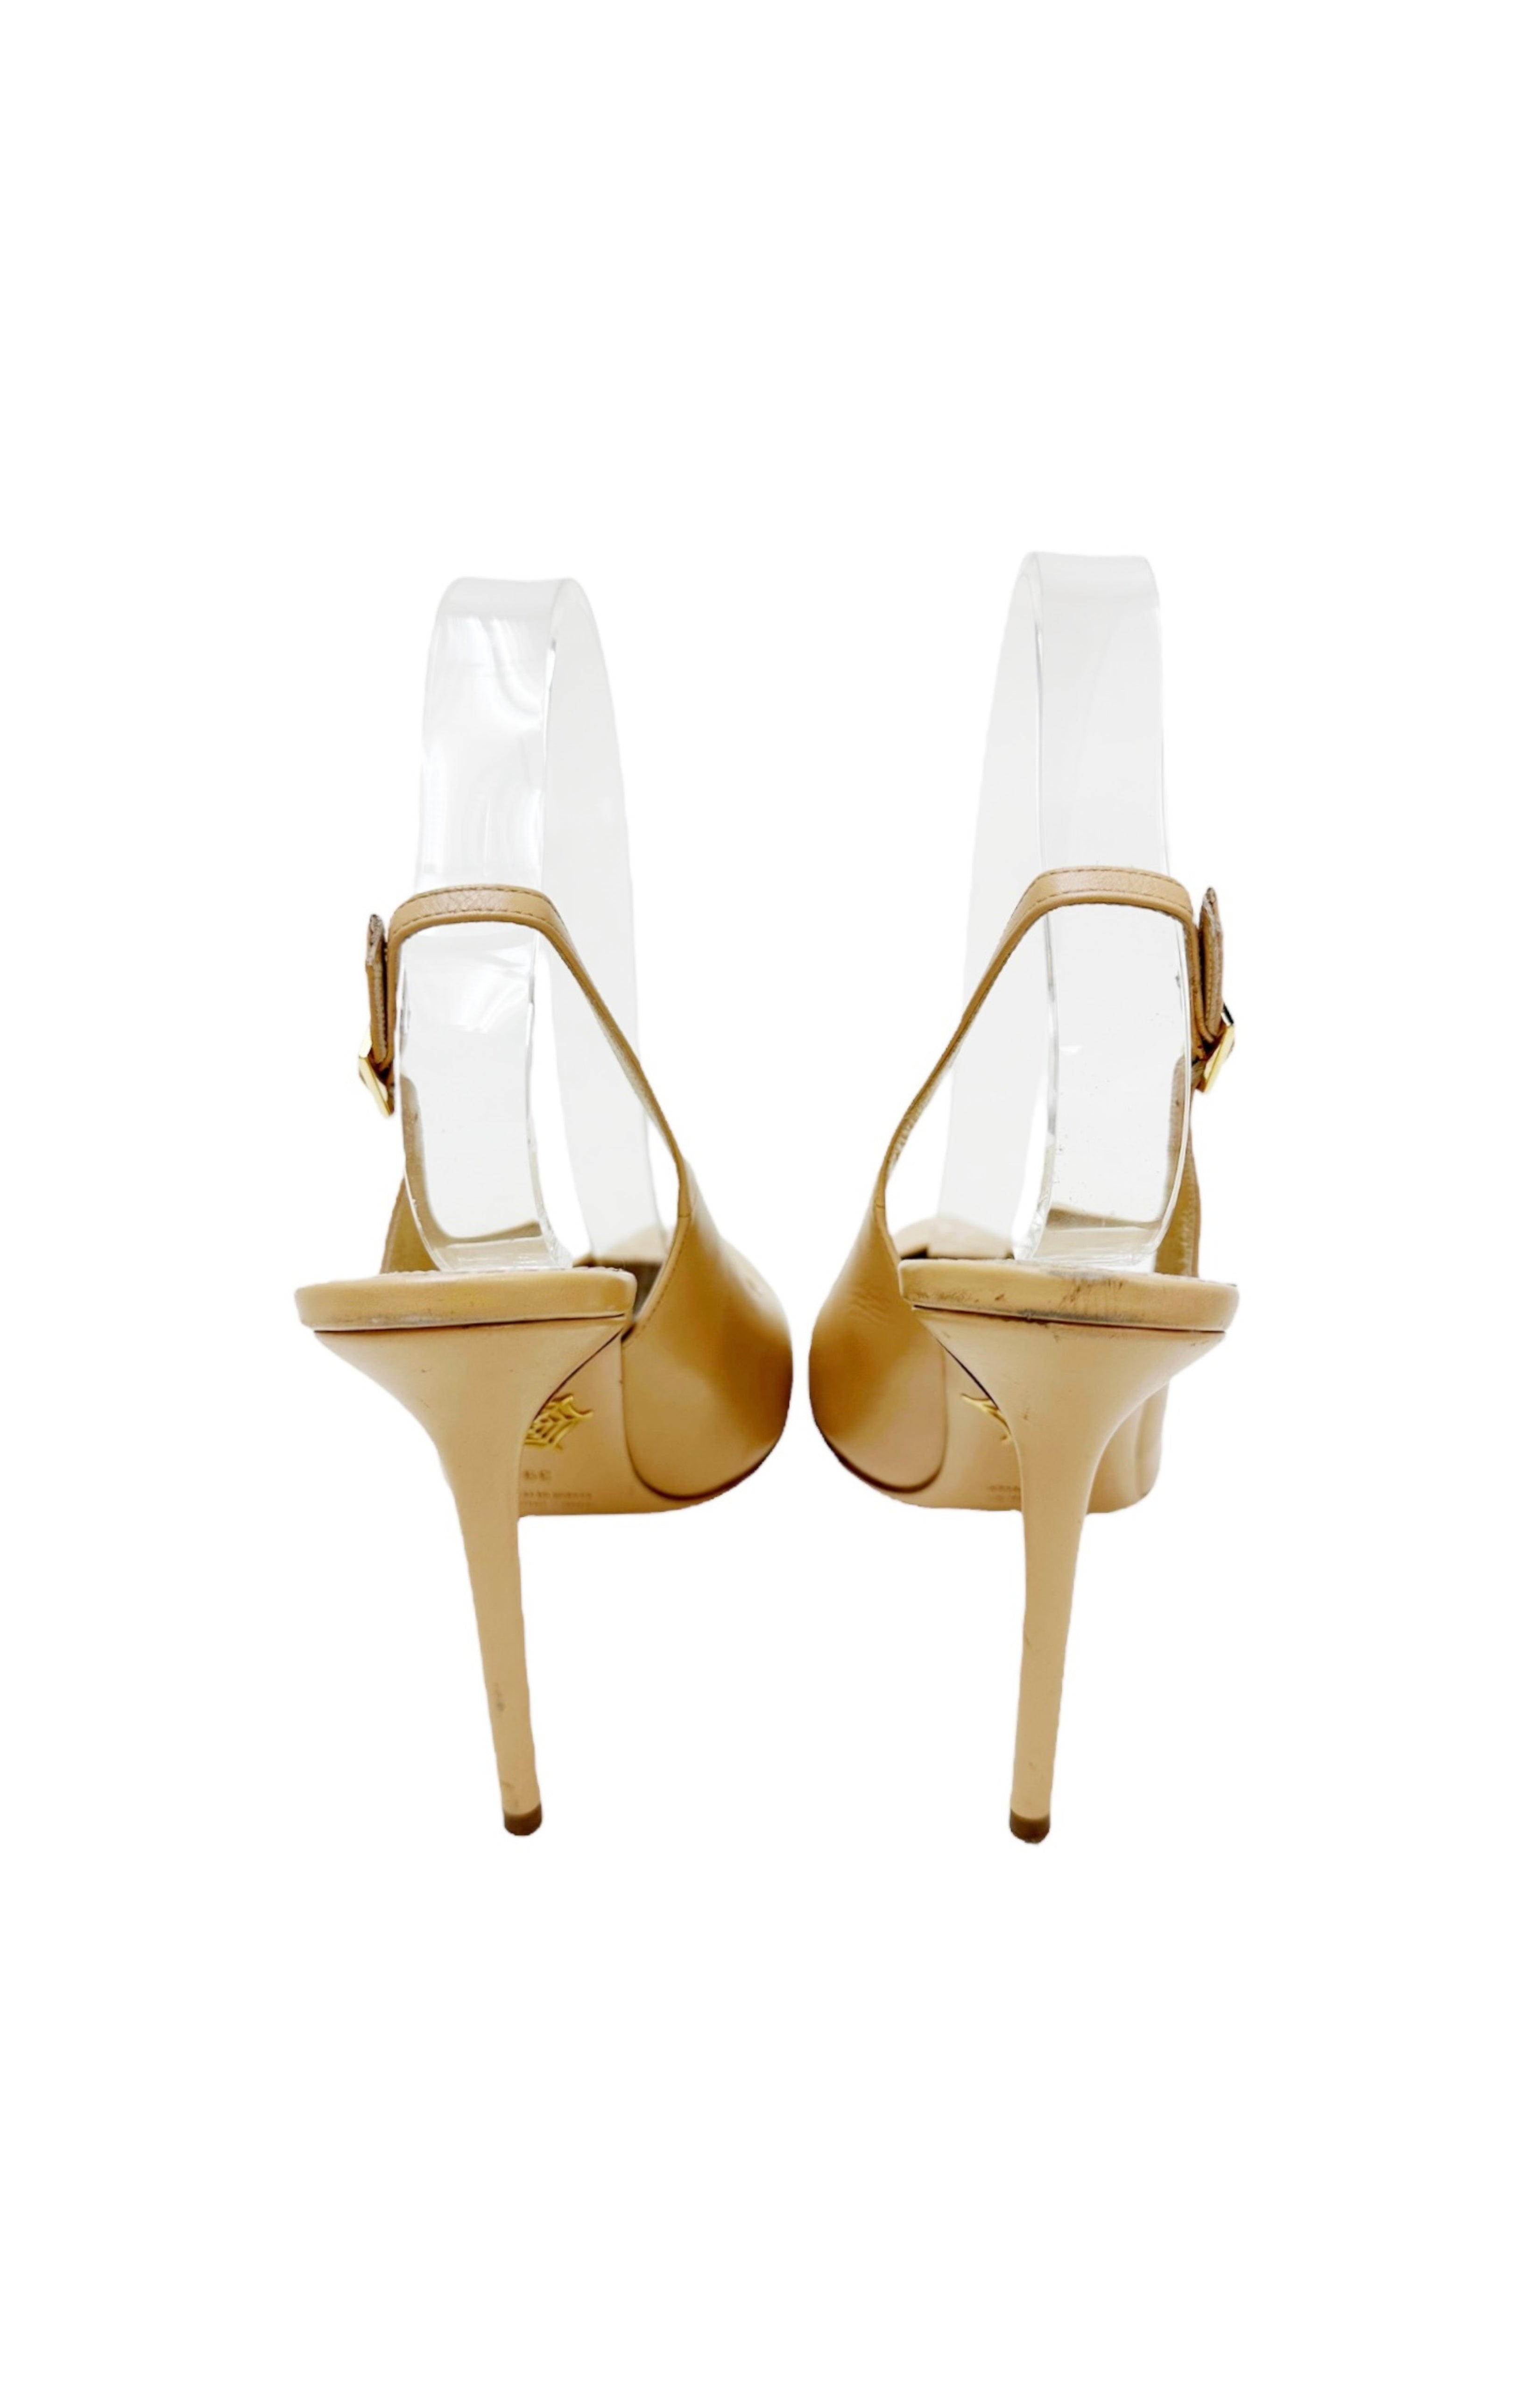 CHARLOTTE OLYMPIA Pumps Size: EUR 39 / Fit like US 8.5-9